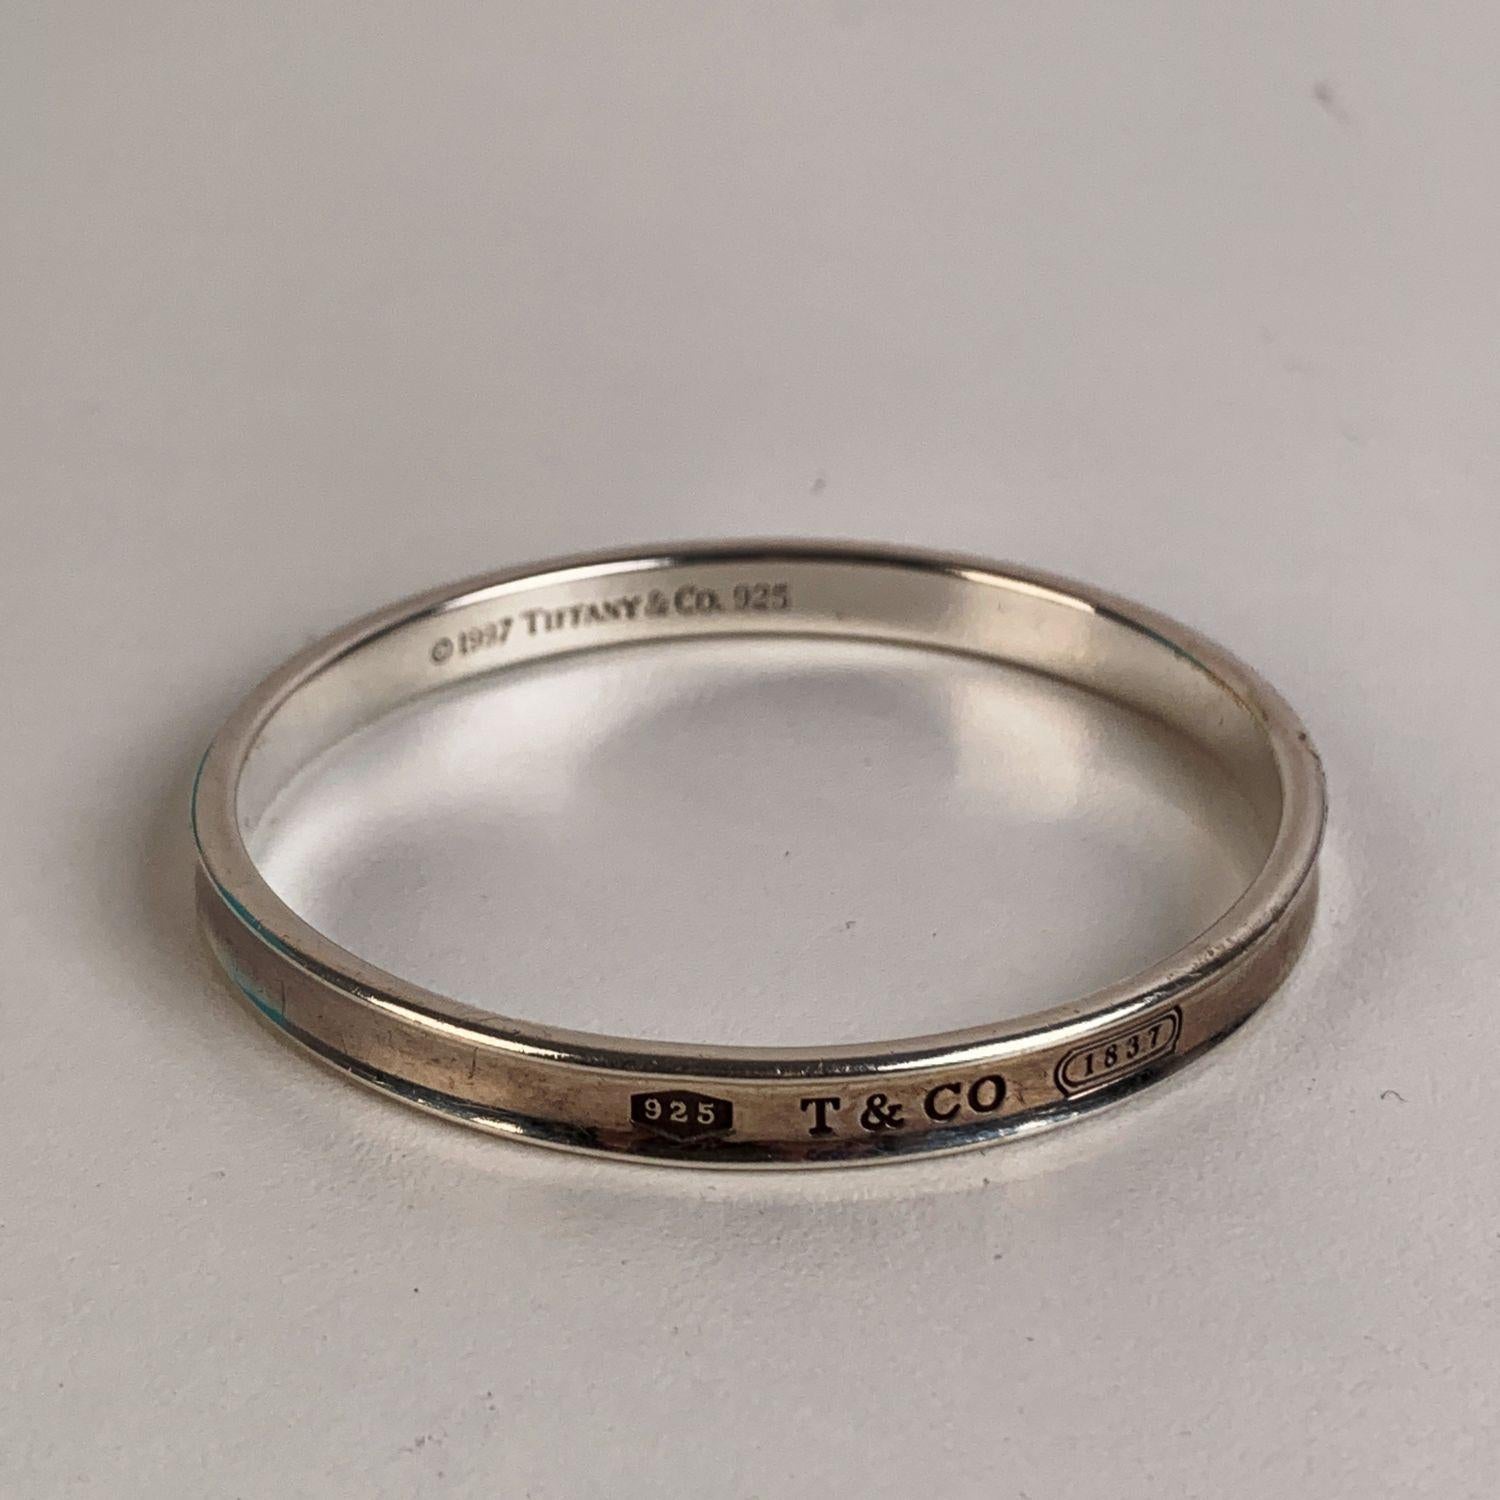 Beautiful sterling silver bangle bracelet by Tifffany& Co. The bracelet has a concave design and is engraved with the year 1837, the year Tiffany was founded. '925' hallmark engraved on top. Copyright symbol with '1997 Tiffany & Co.' engraved